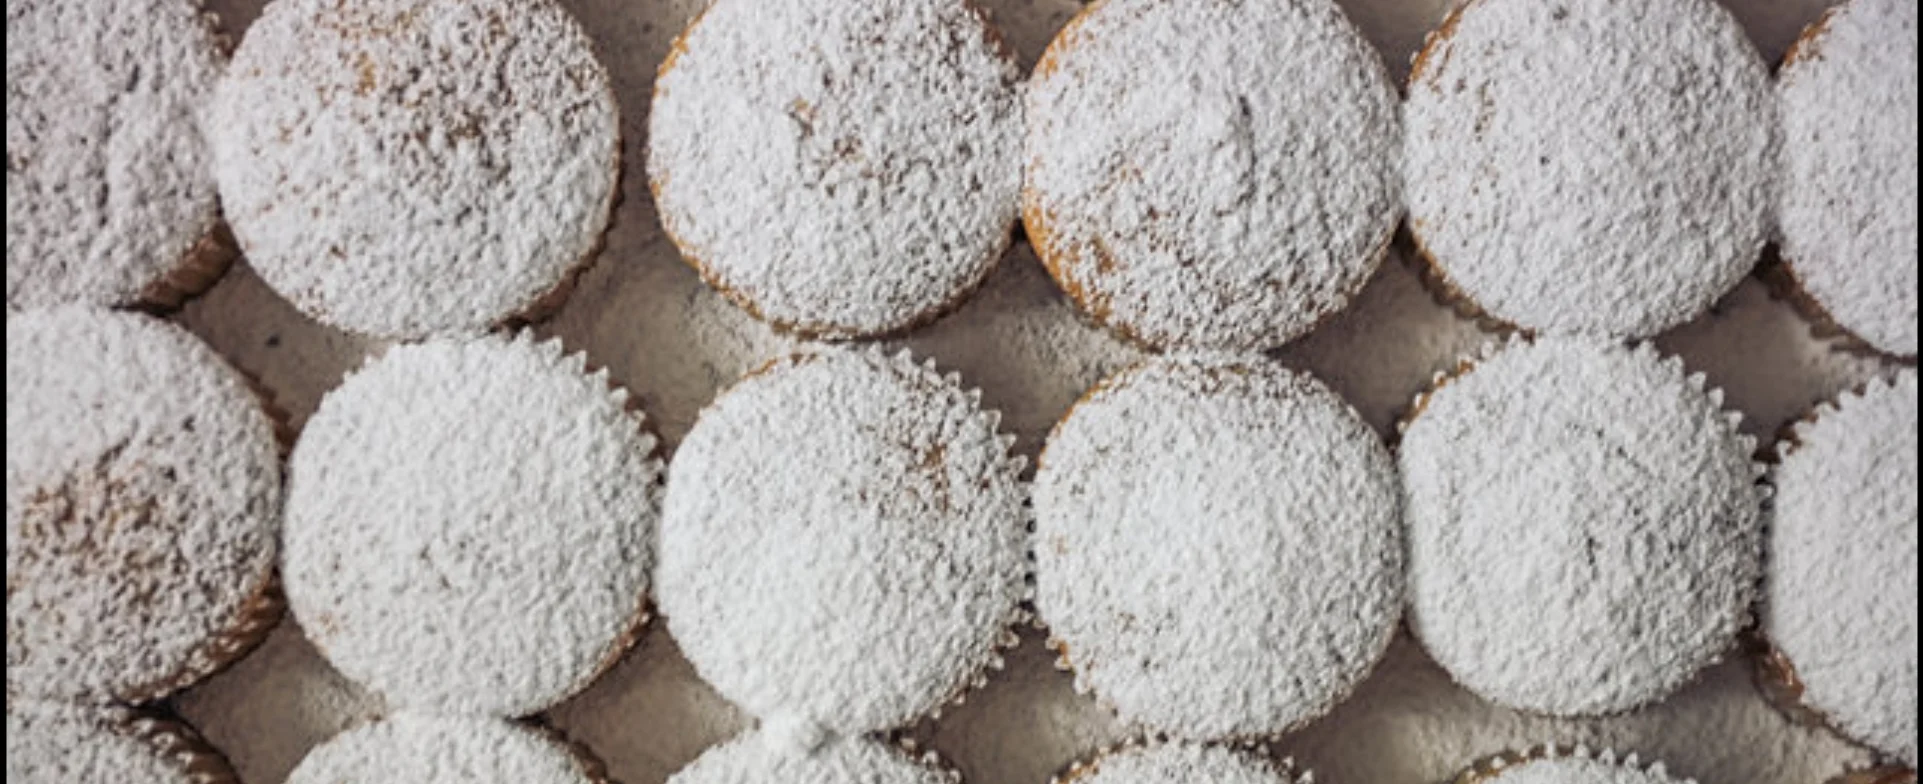 Muffins with powdered sugar on top